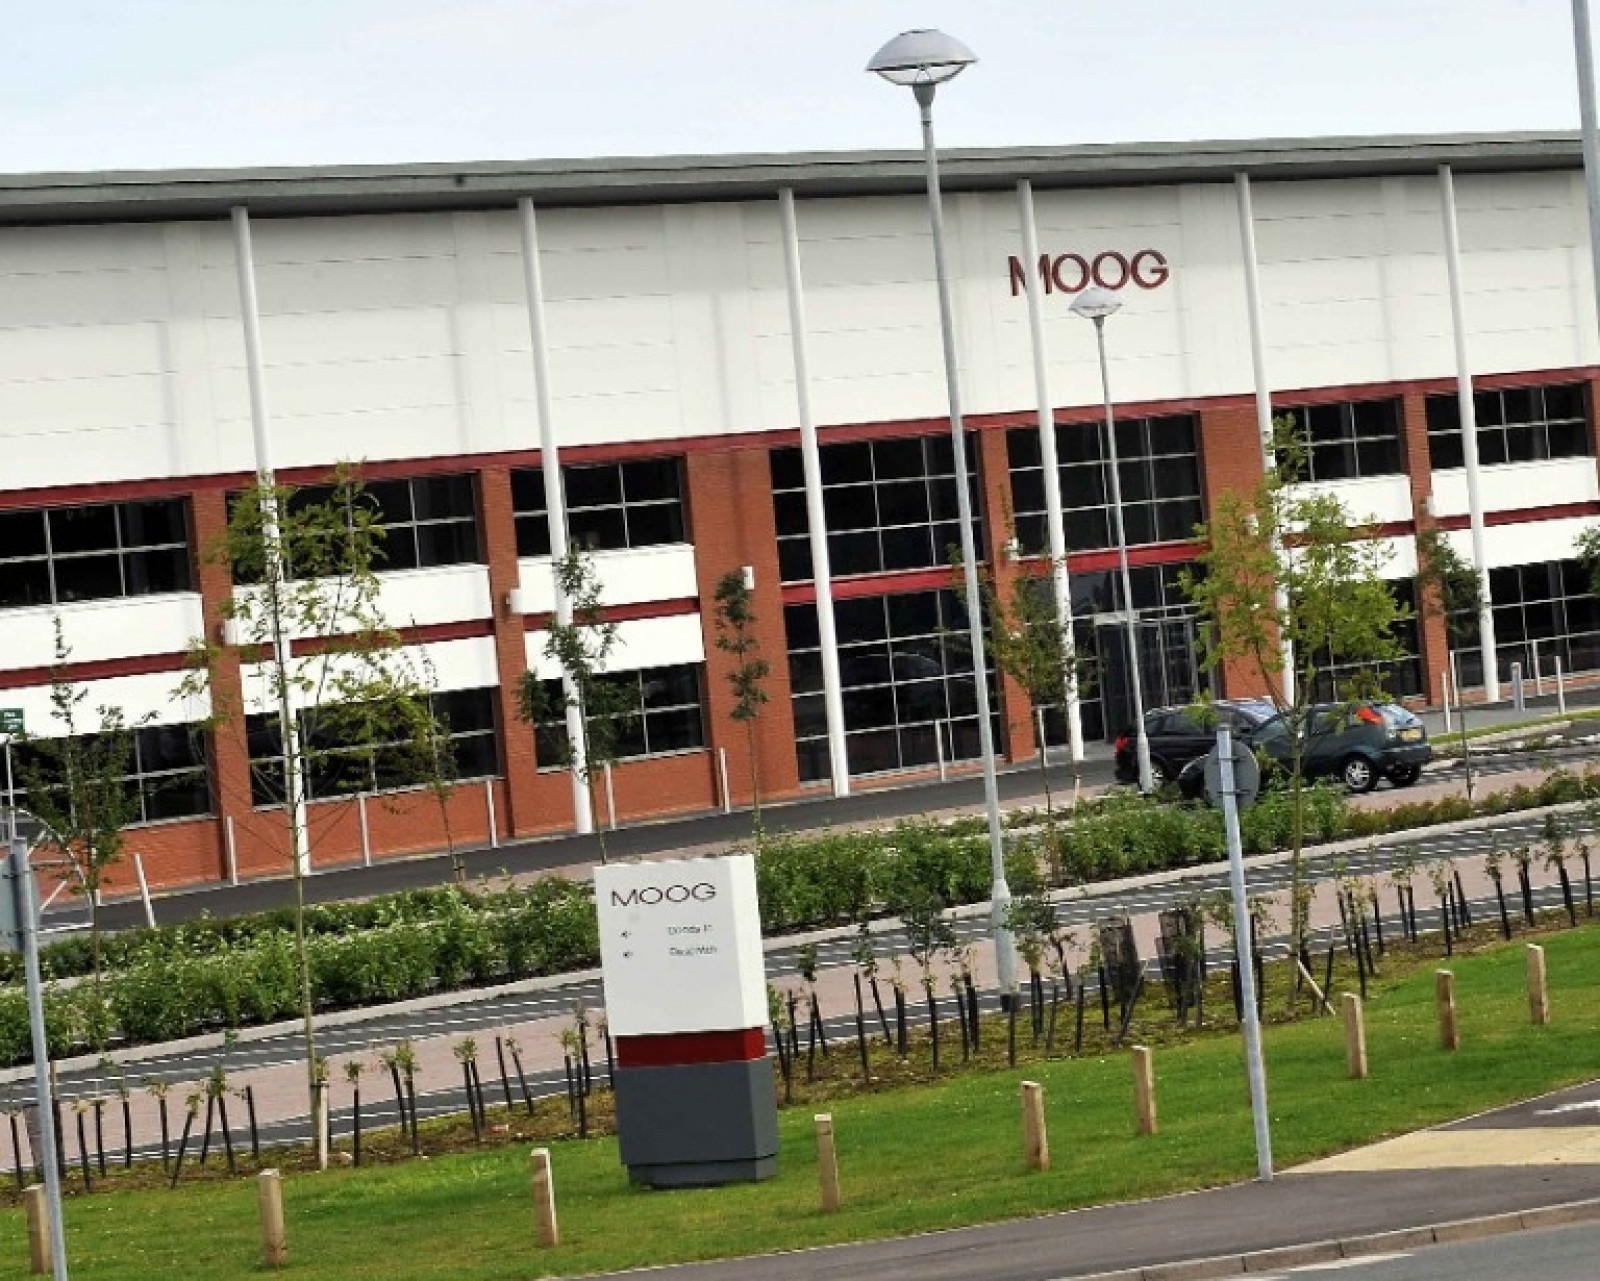 Plans for Moog’s £40m Centre of Excellence facility as developer looks for funds